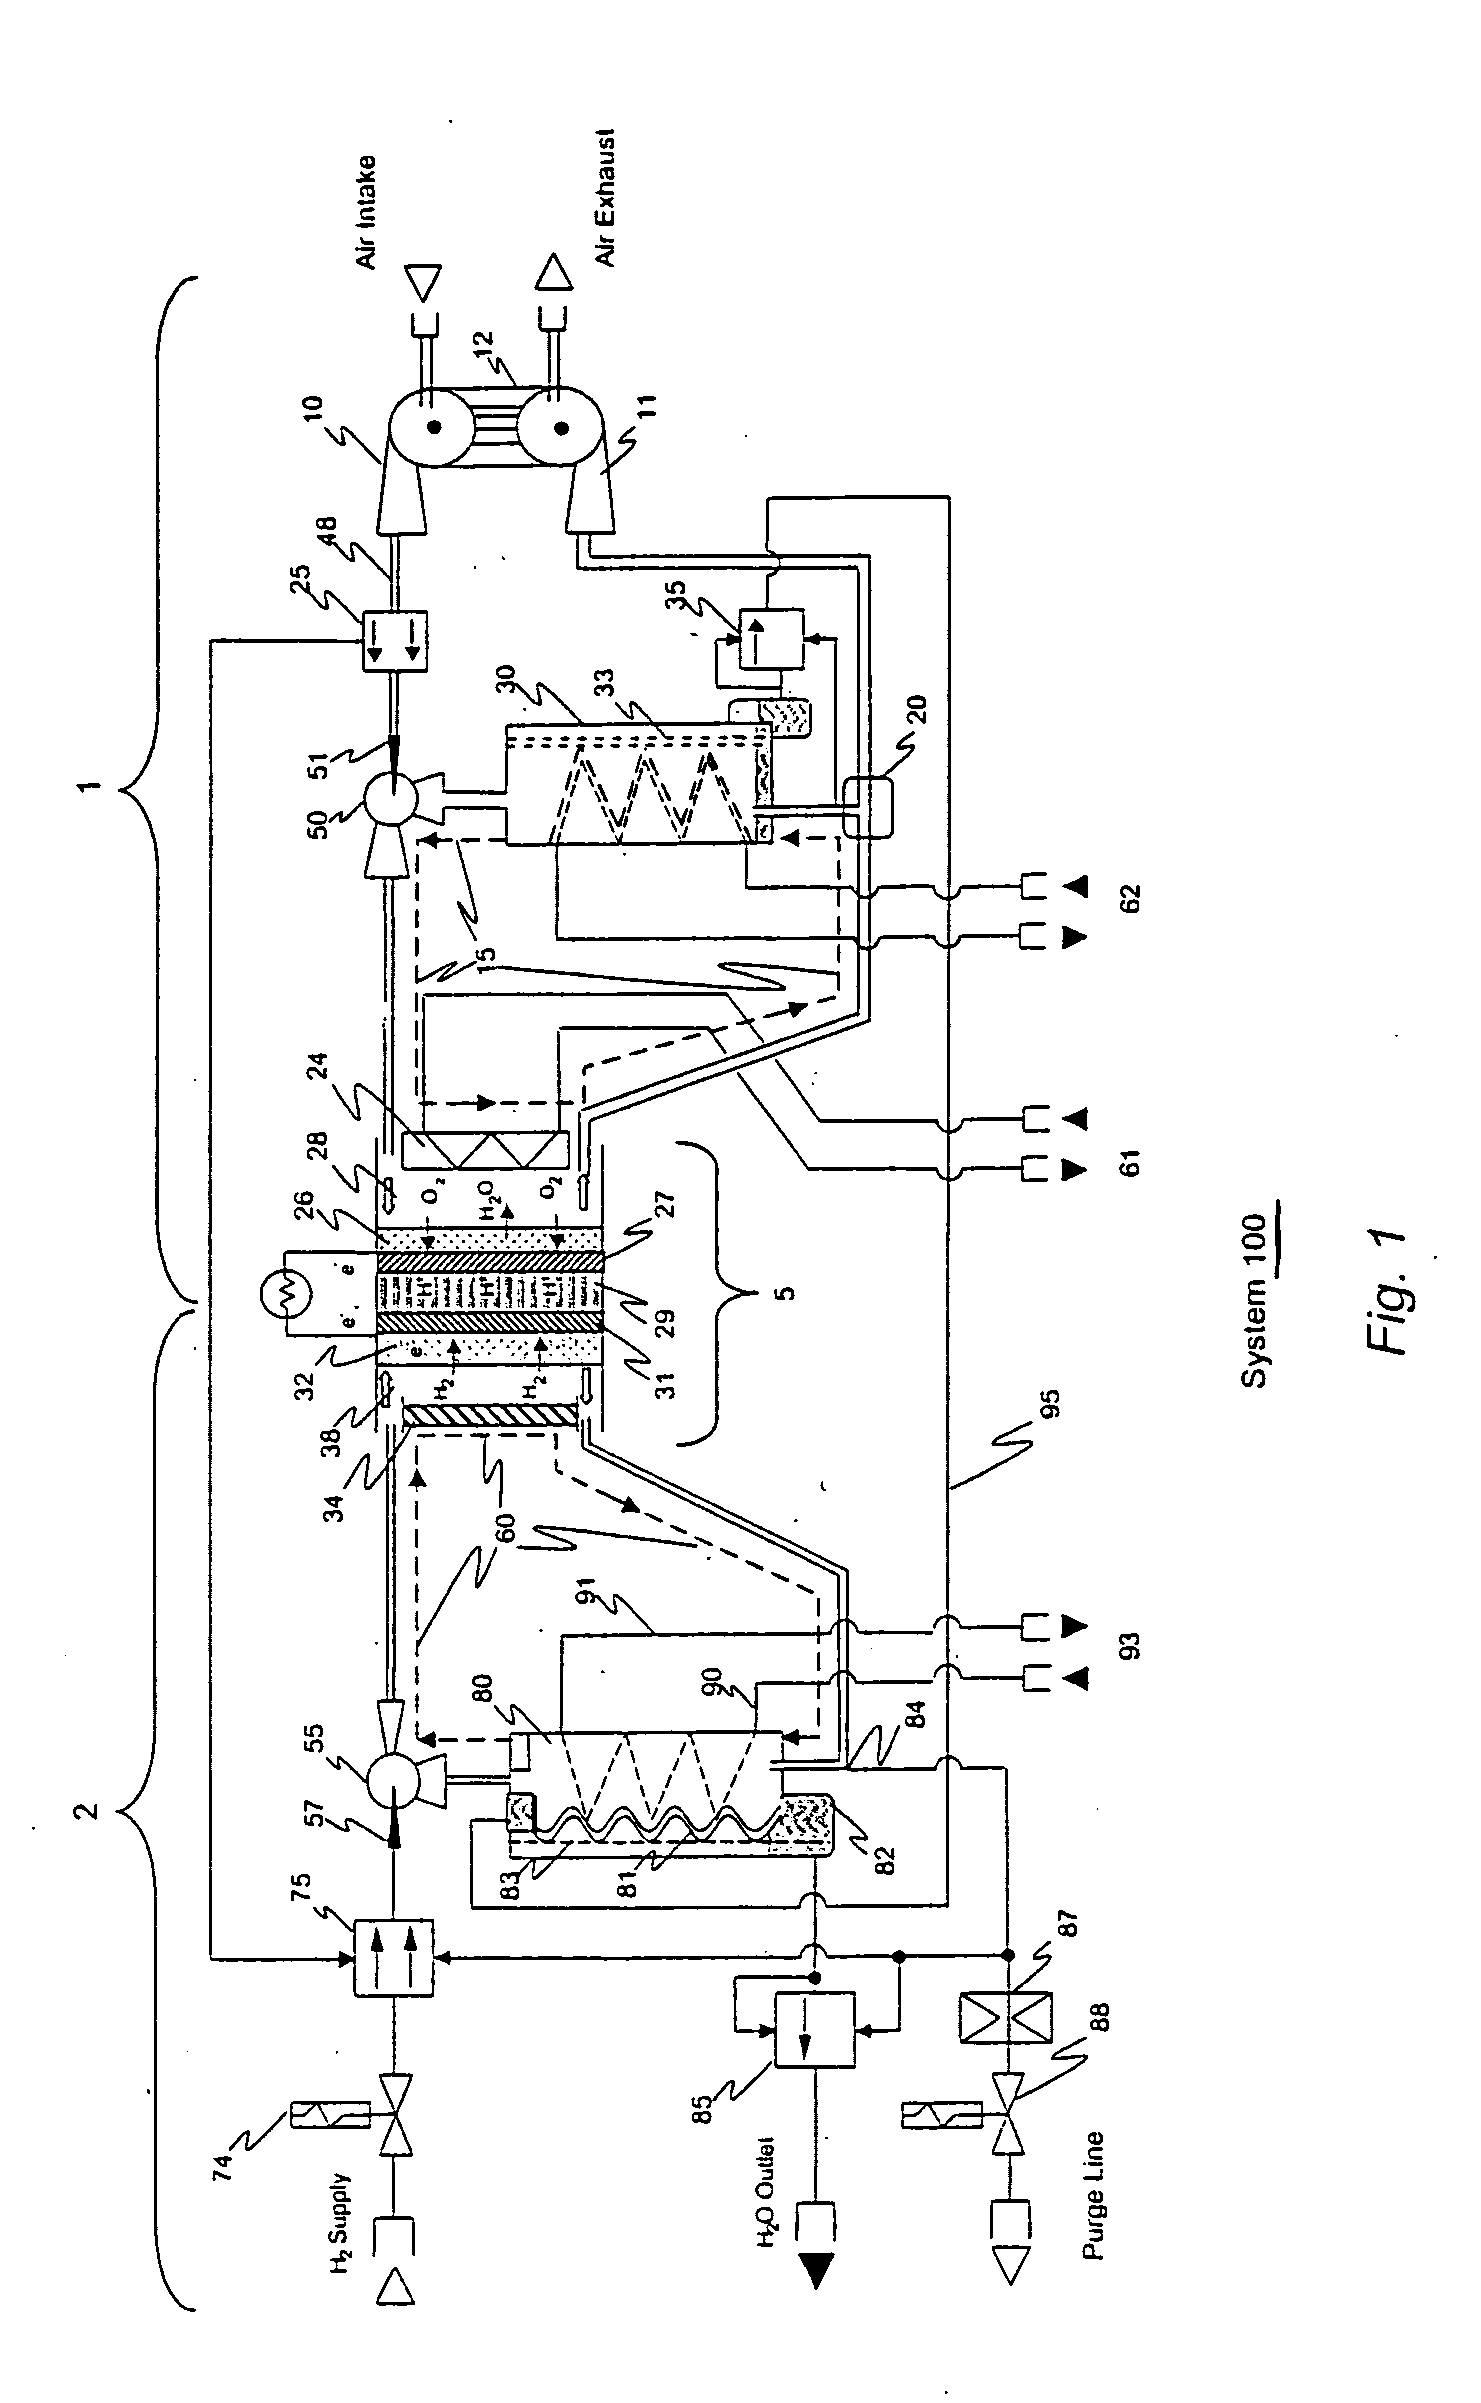 Fuel cell with integrated feedback control